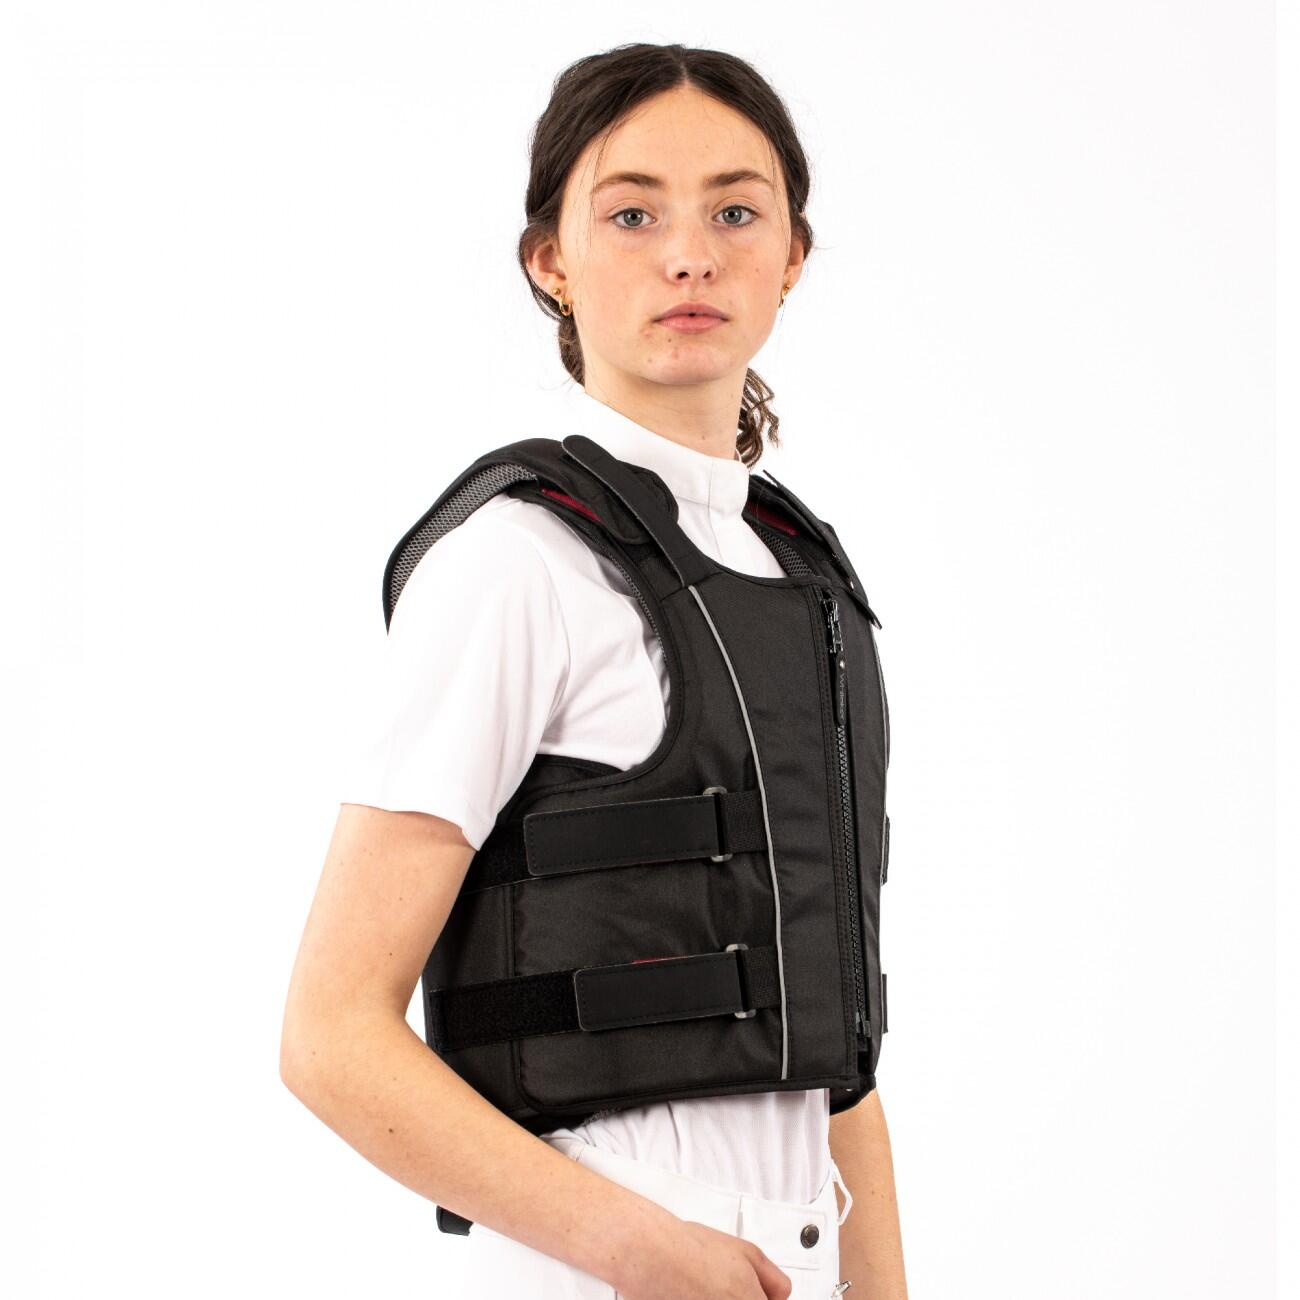 Whitaker Pro Body Protector 2/5